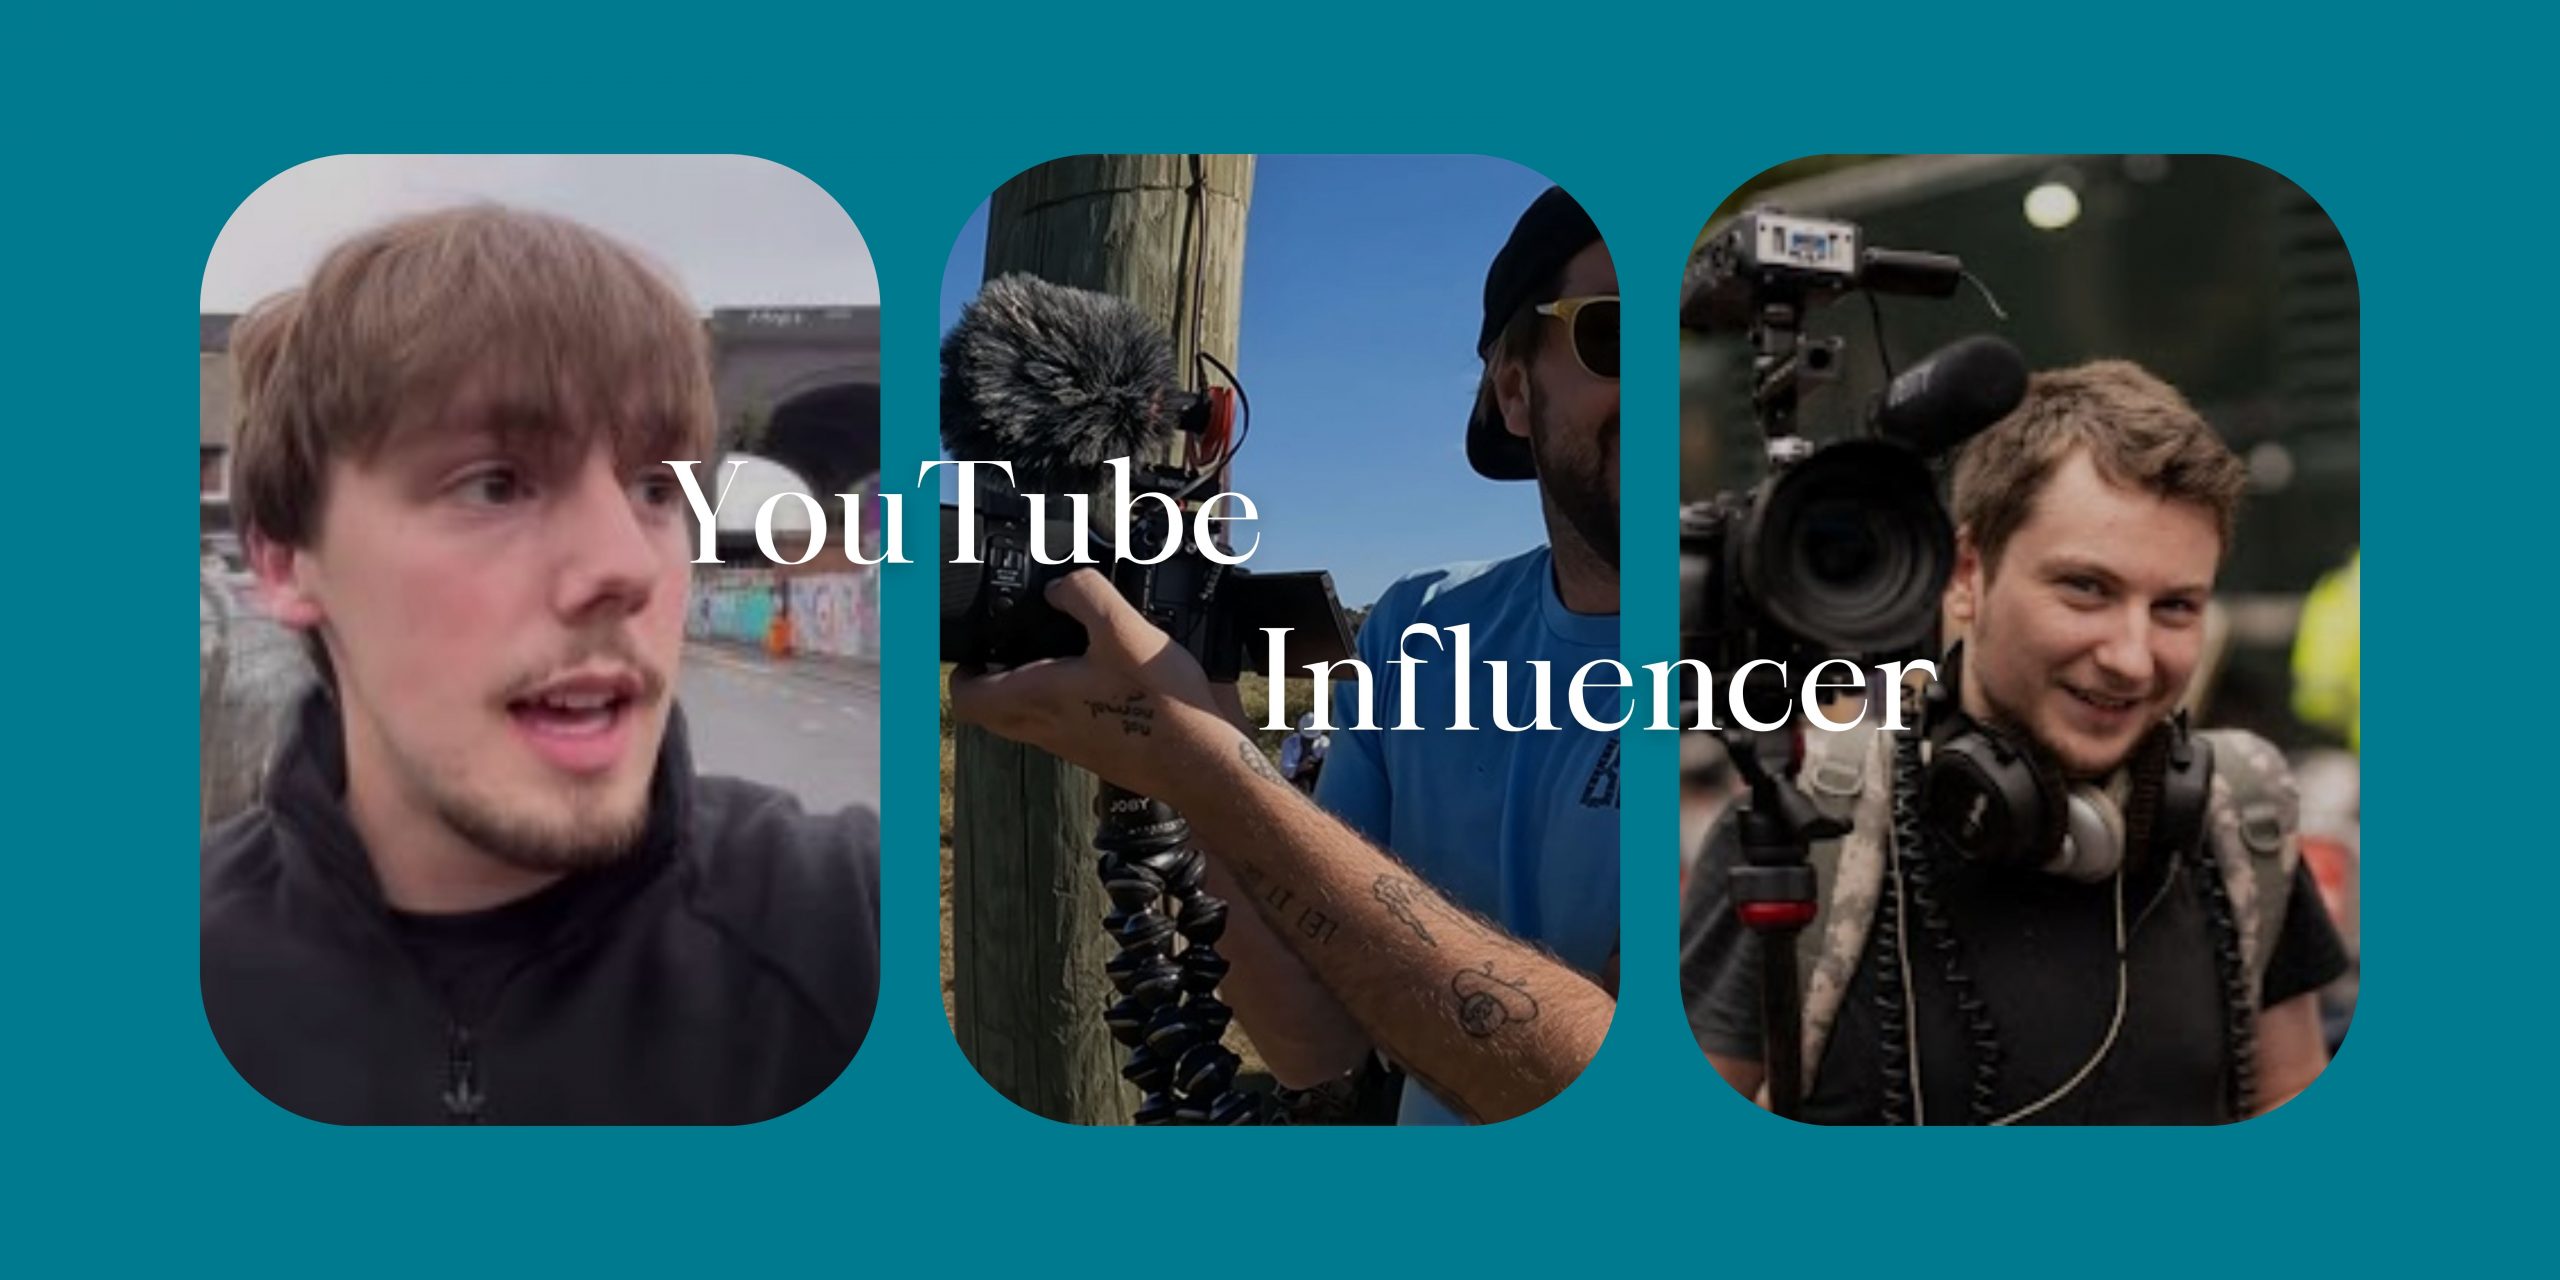 YouTube Influencers